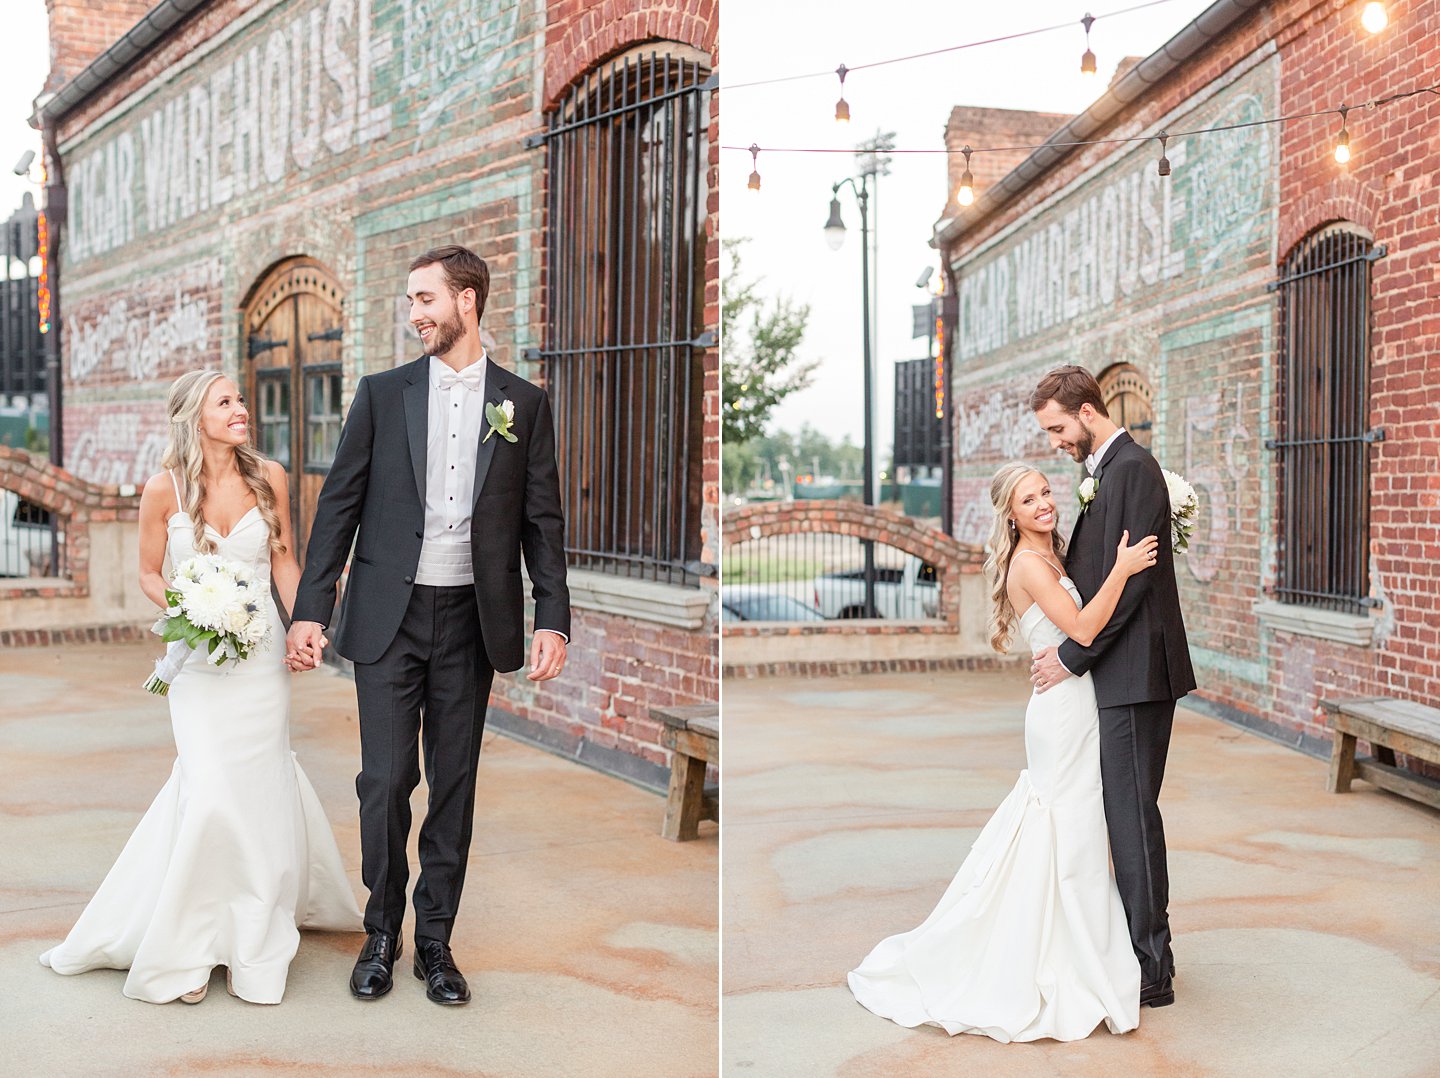 bride and groom wedding portrait at old cigar warehouse in greenville